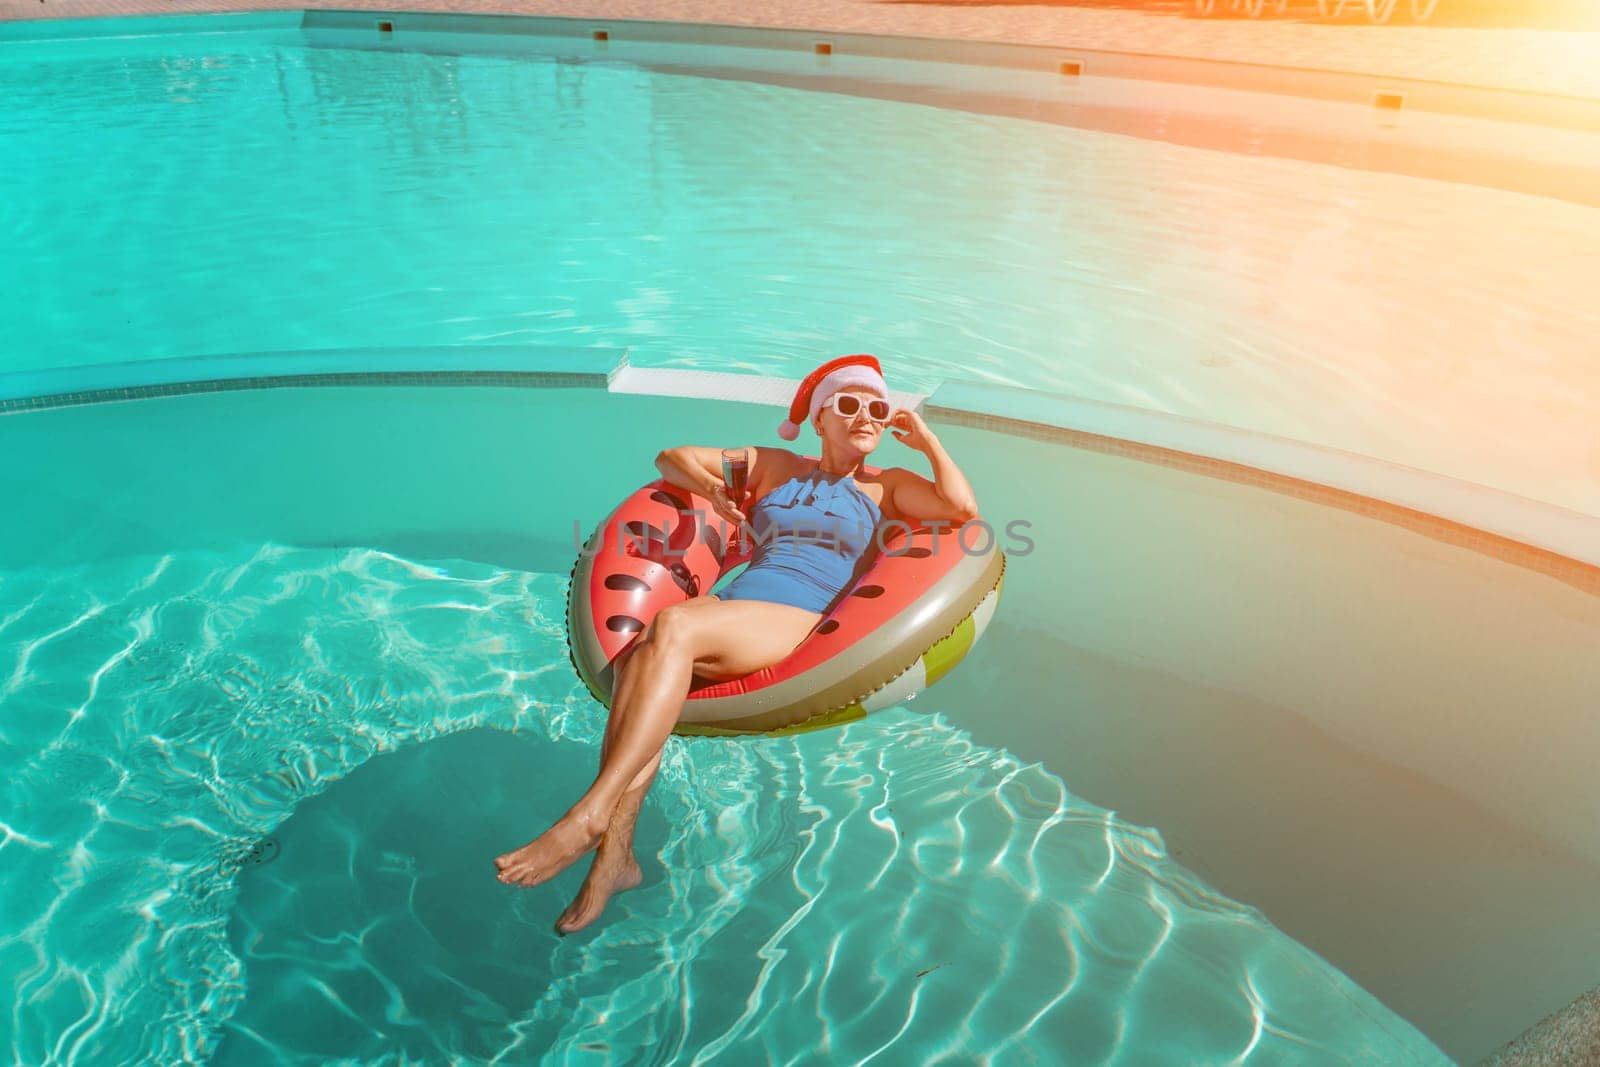 A happy woman in a blue bikini, a red and white Santa hat and sunglasses poses in the pool in an inflatable circle with a watermelon pattern, holding a glass of wine in her hands. Christmas holidays concept